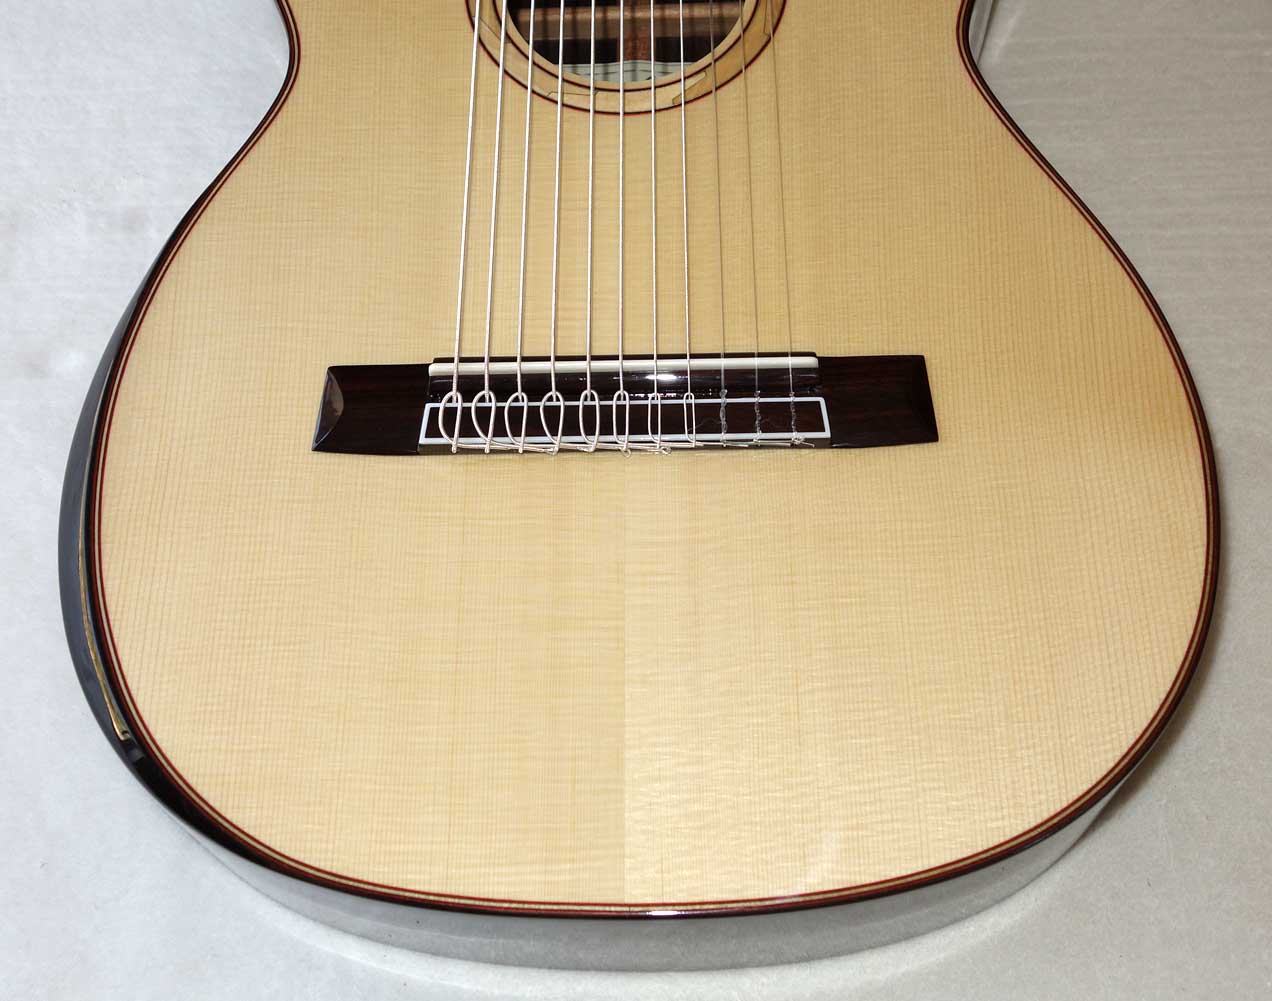 New MILAGRO Master Alto 11-S / Spruce Top / 11-String Classical Harp Guitar w/Case, All Solid Tonewoods #7536